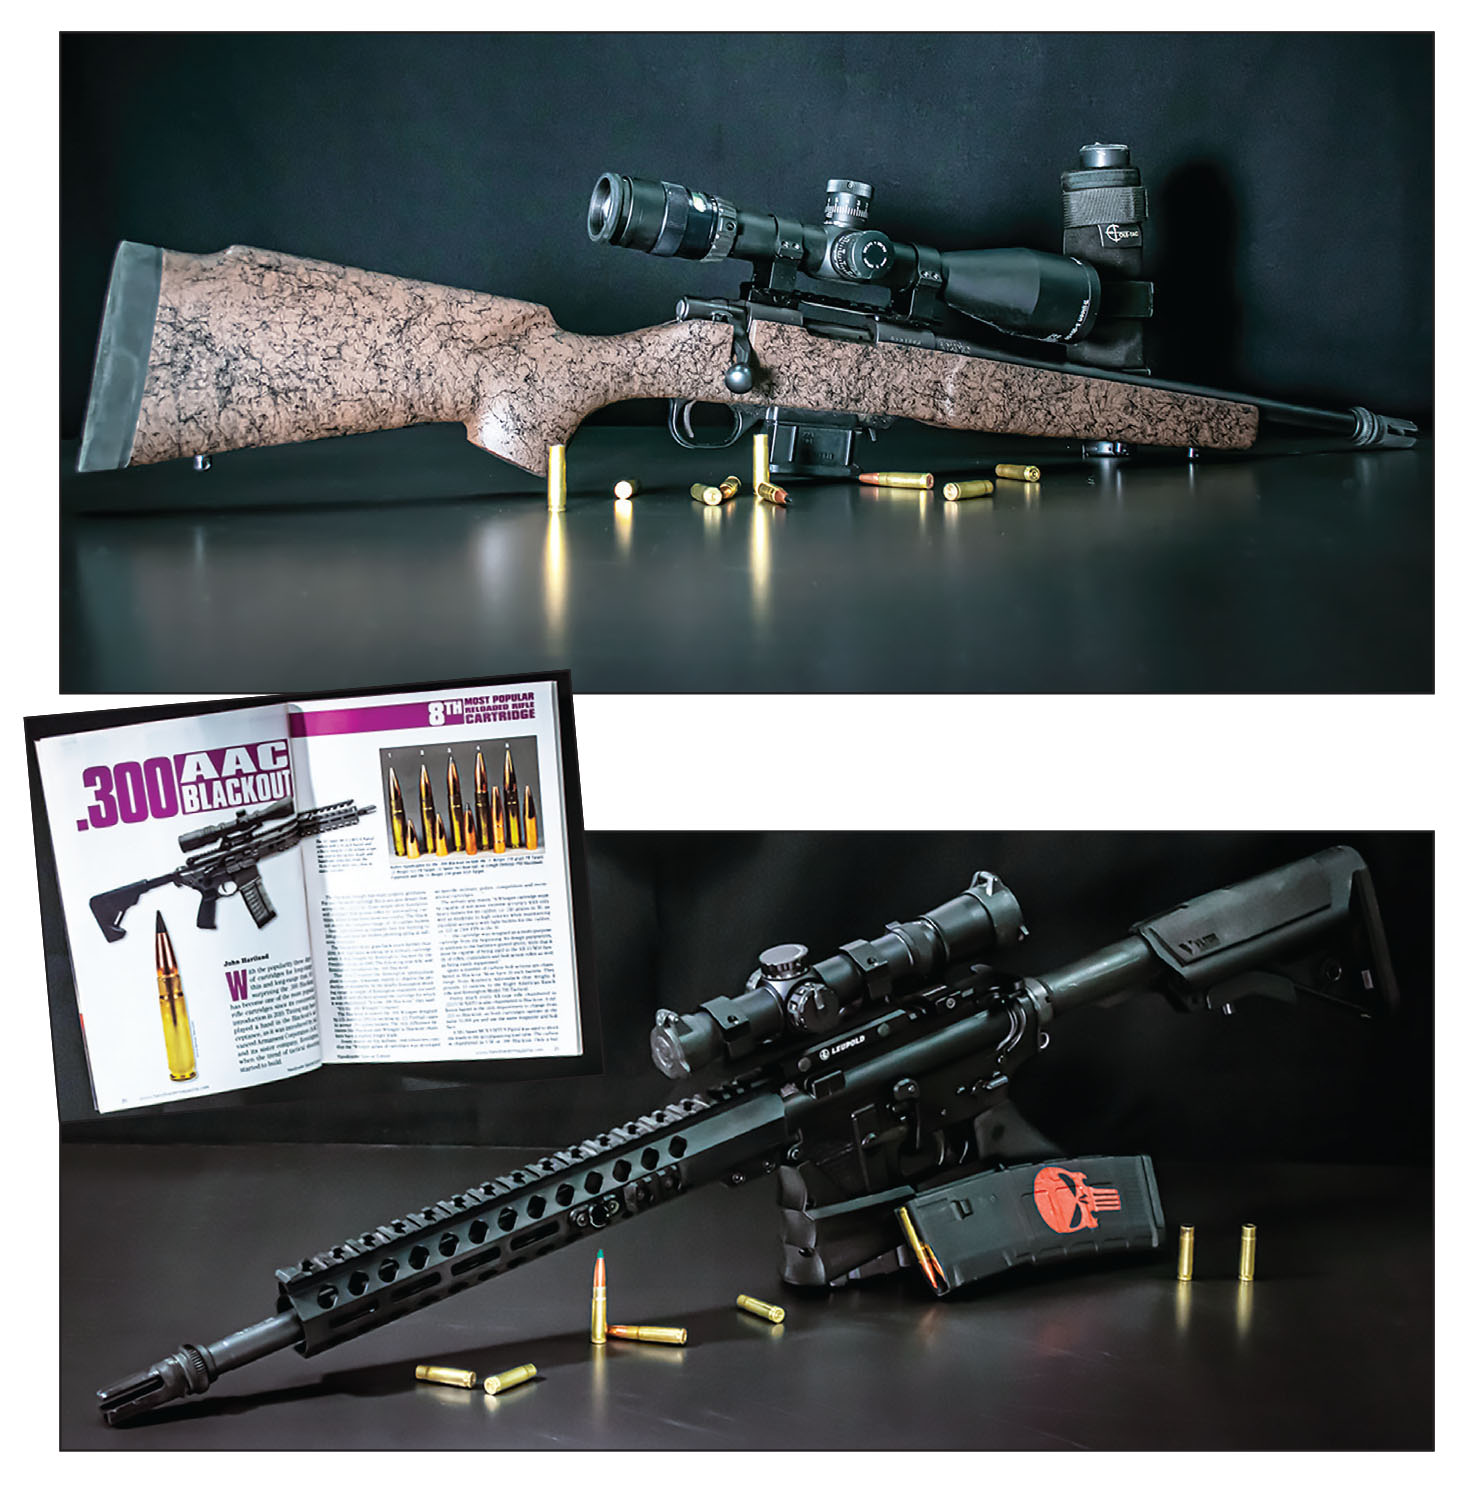 Two rifles were selected for testing. The first was a Howa mini-action with a 16-inch barrel and the second was an AR-15, also featuring a 16-inch barrel.